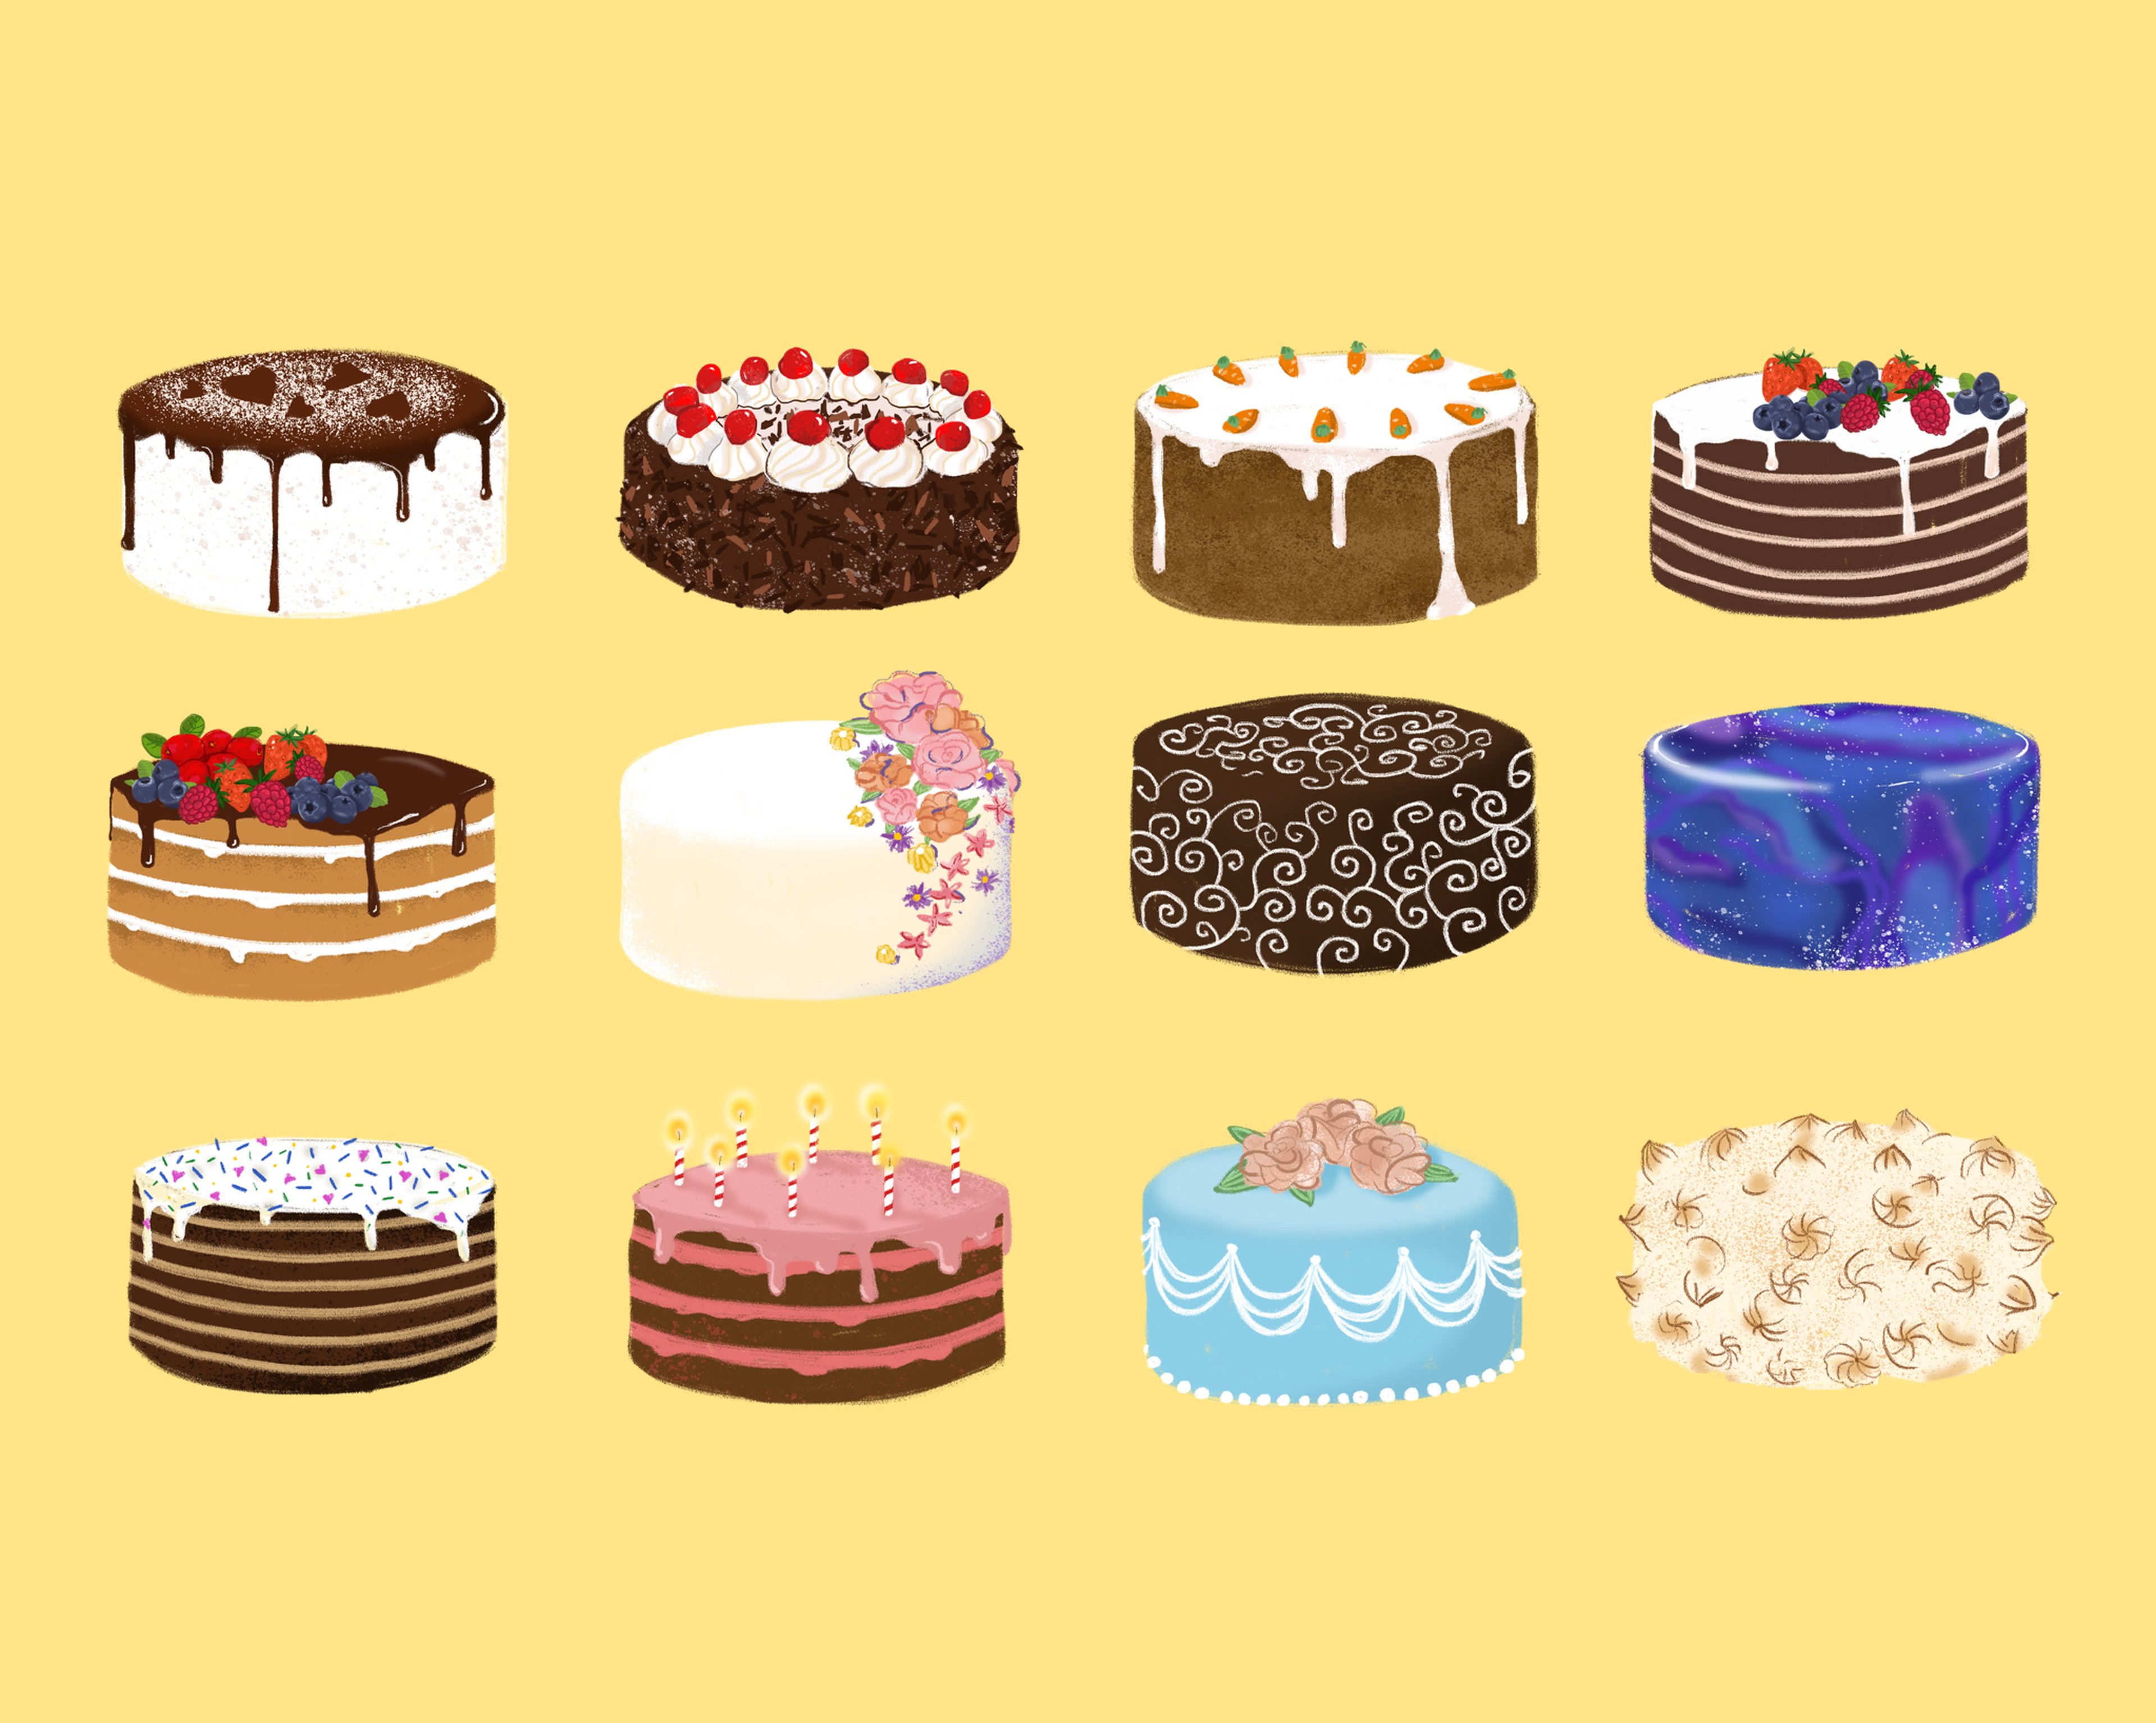 We like cakes. Cake Decorating things рисунок. He ____ (like) Cakes.. Cake in the circle. 20 Cakes in a Row.